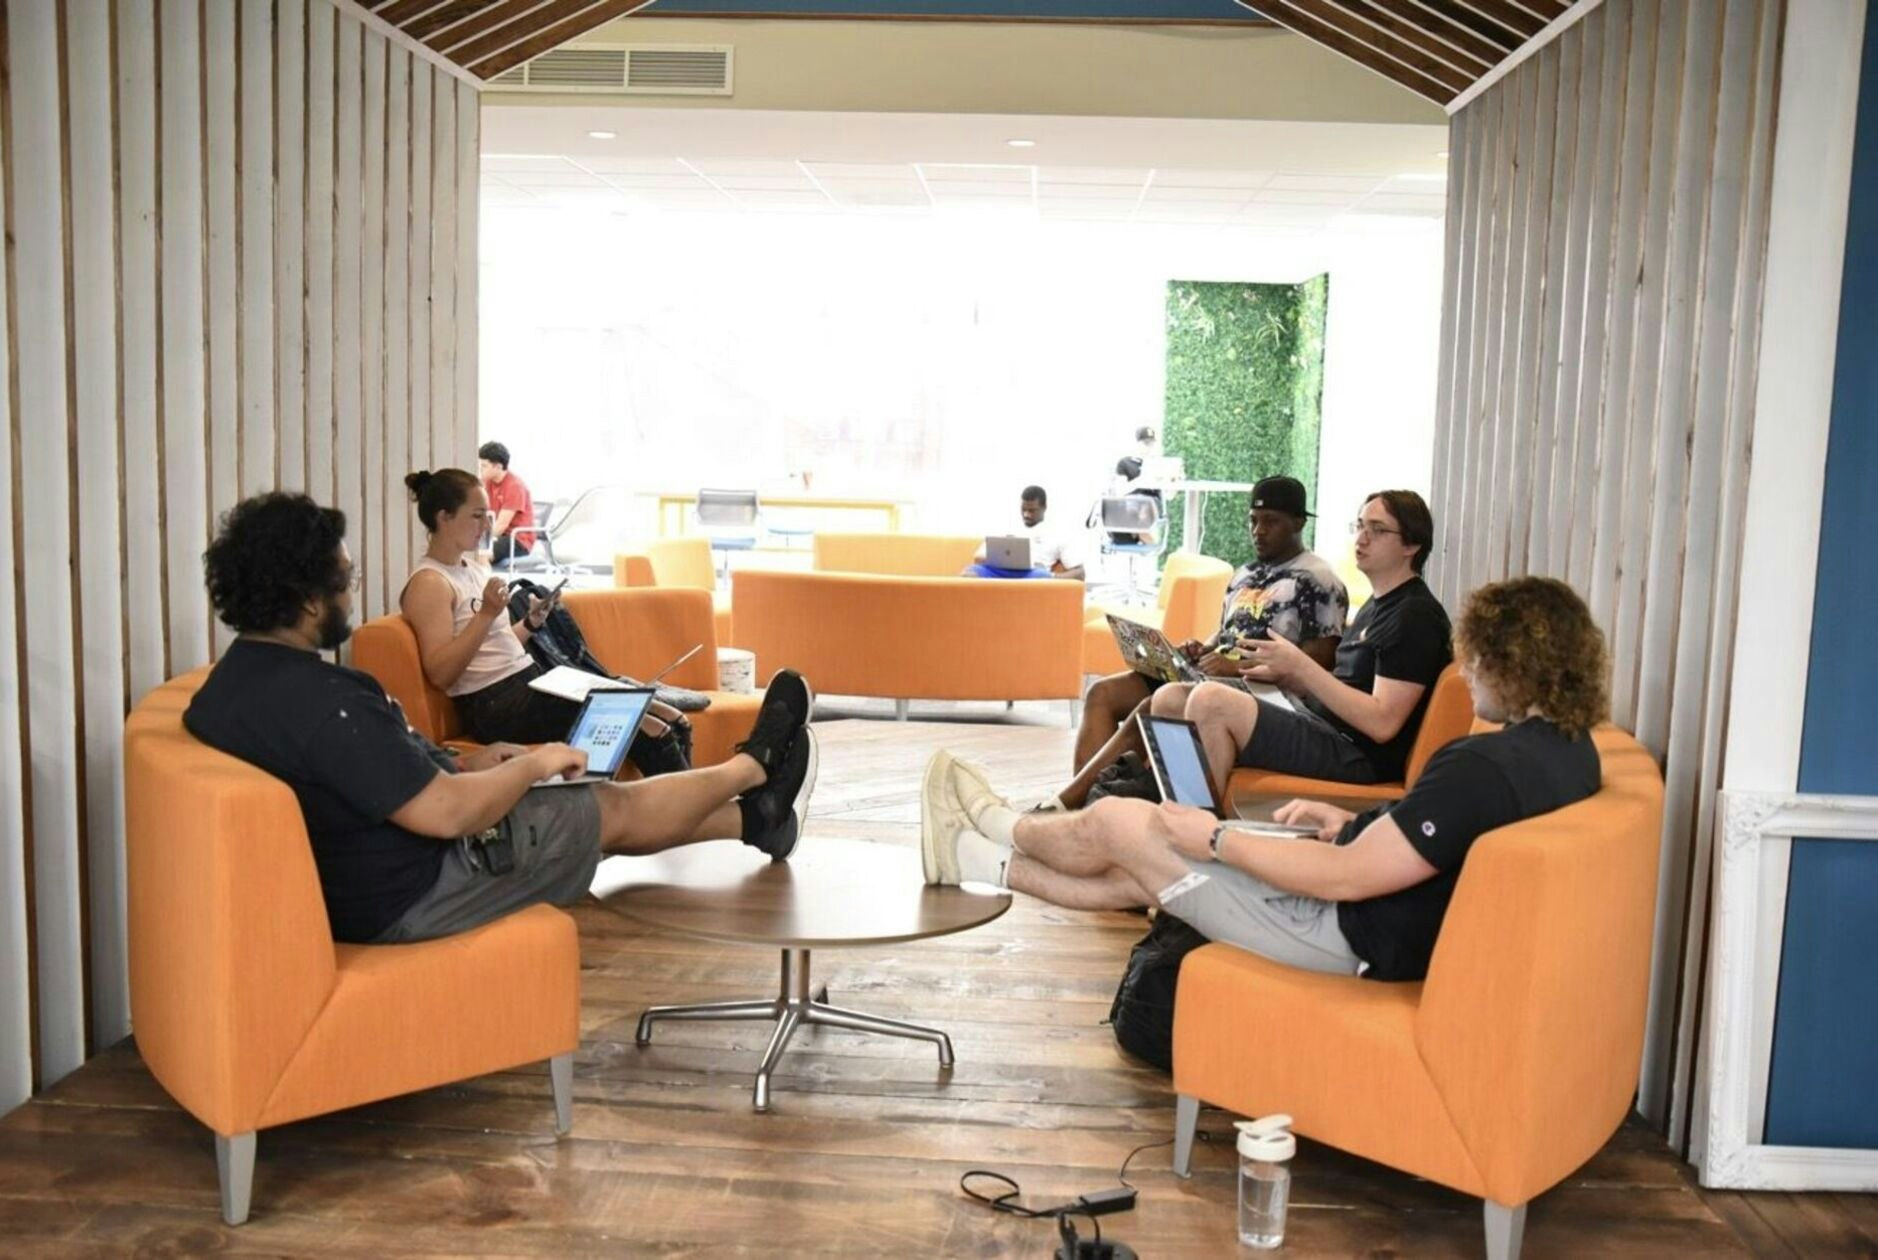 Students studying in organge chairs in the Hub